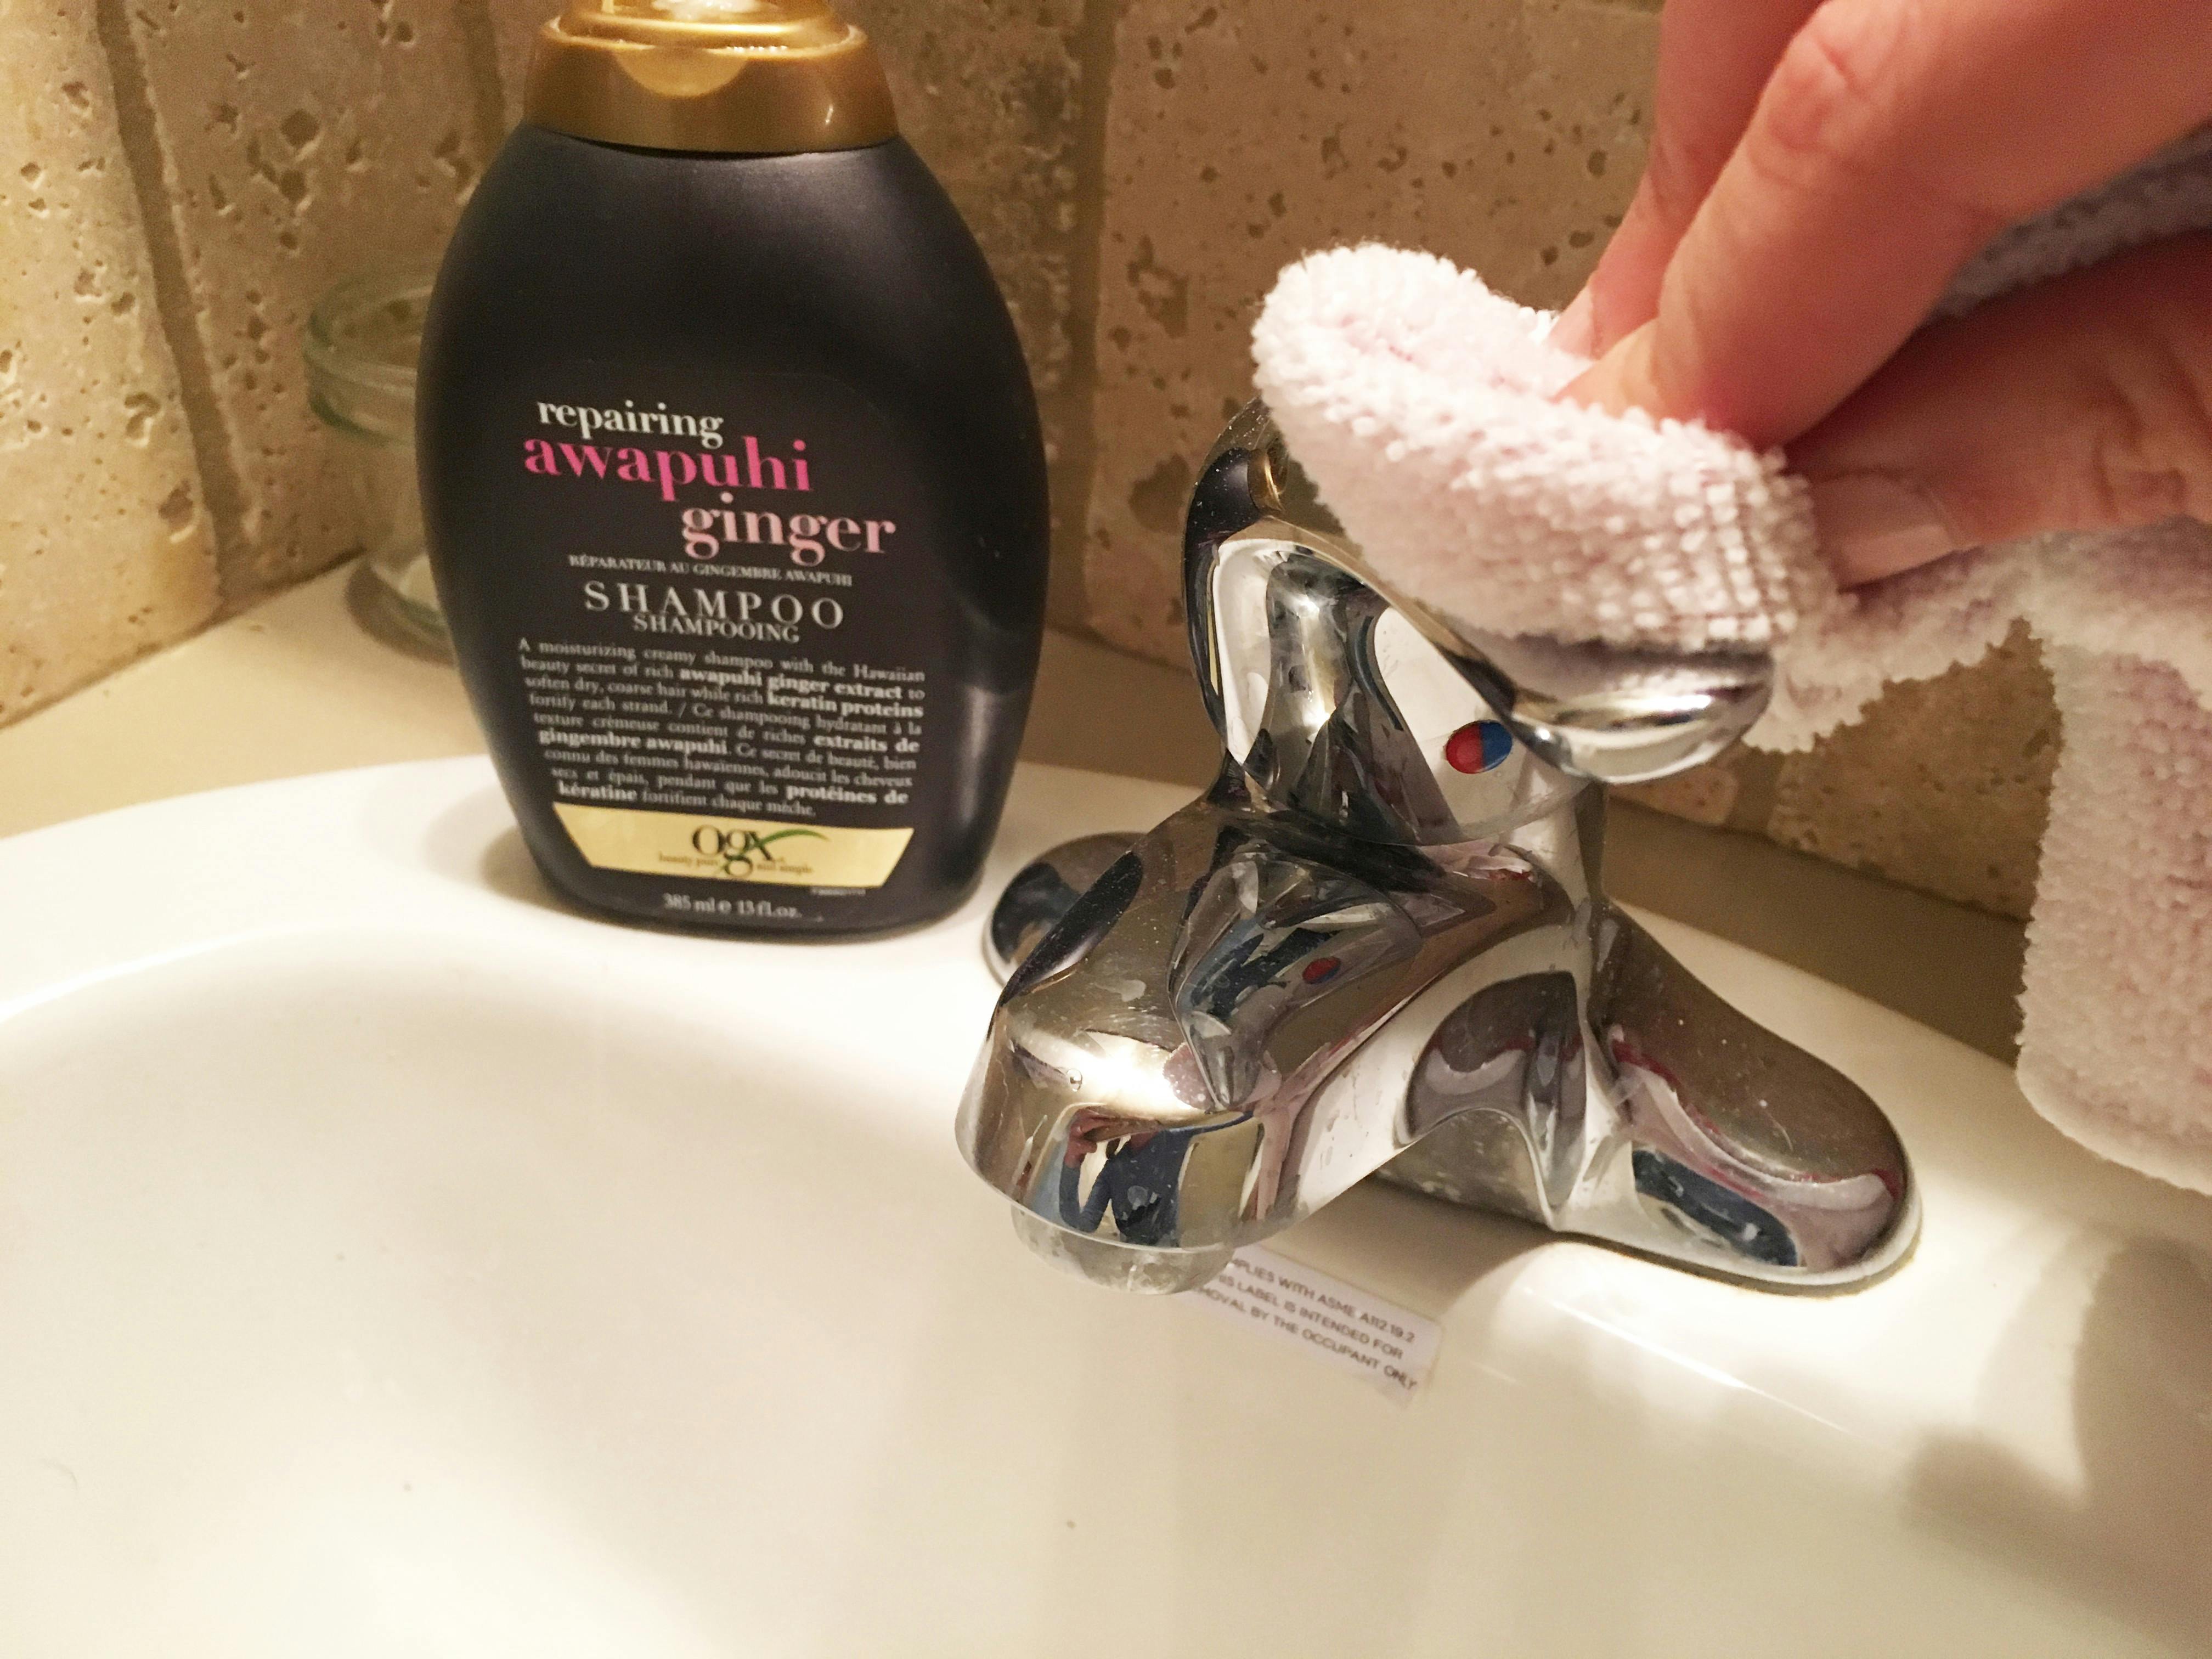 16 Ingenious Uses For Shampoo Will Shock You - The Krazy Coupon Lady